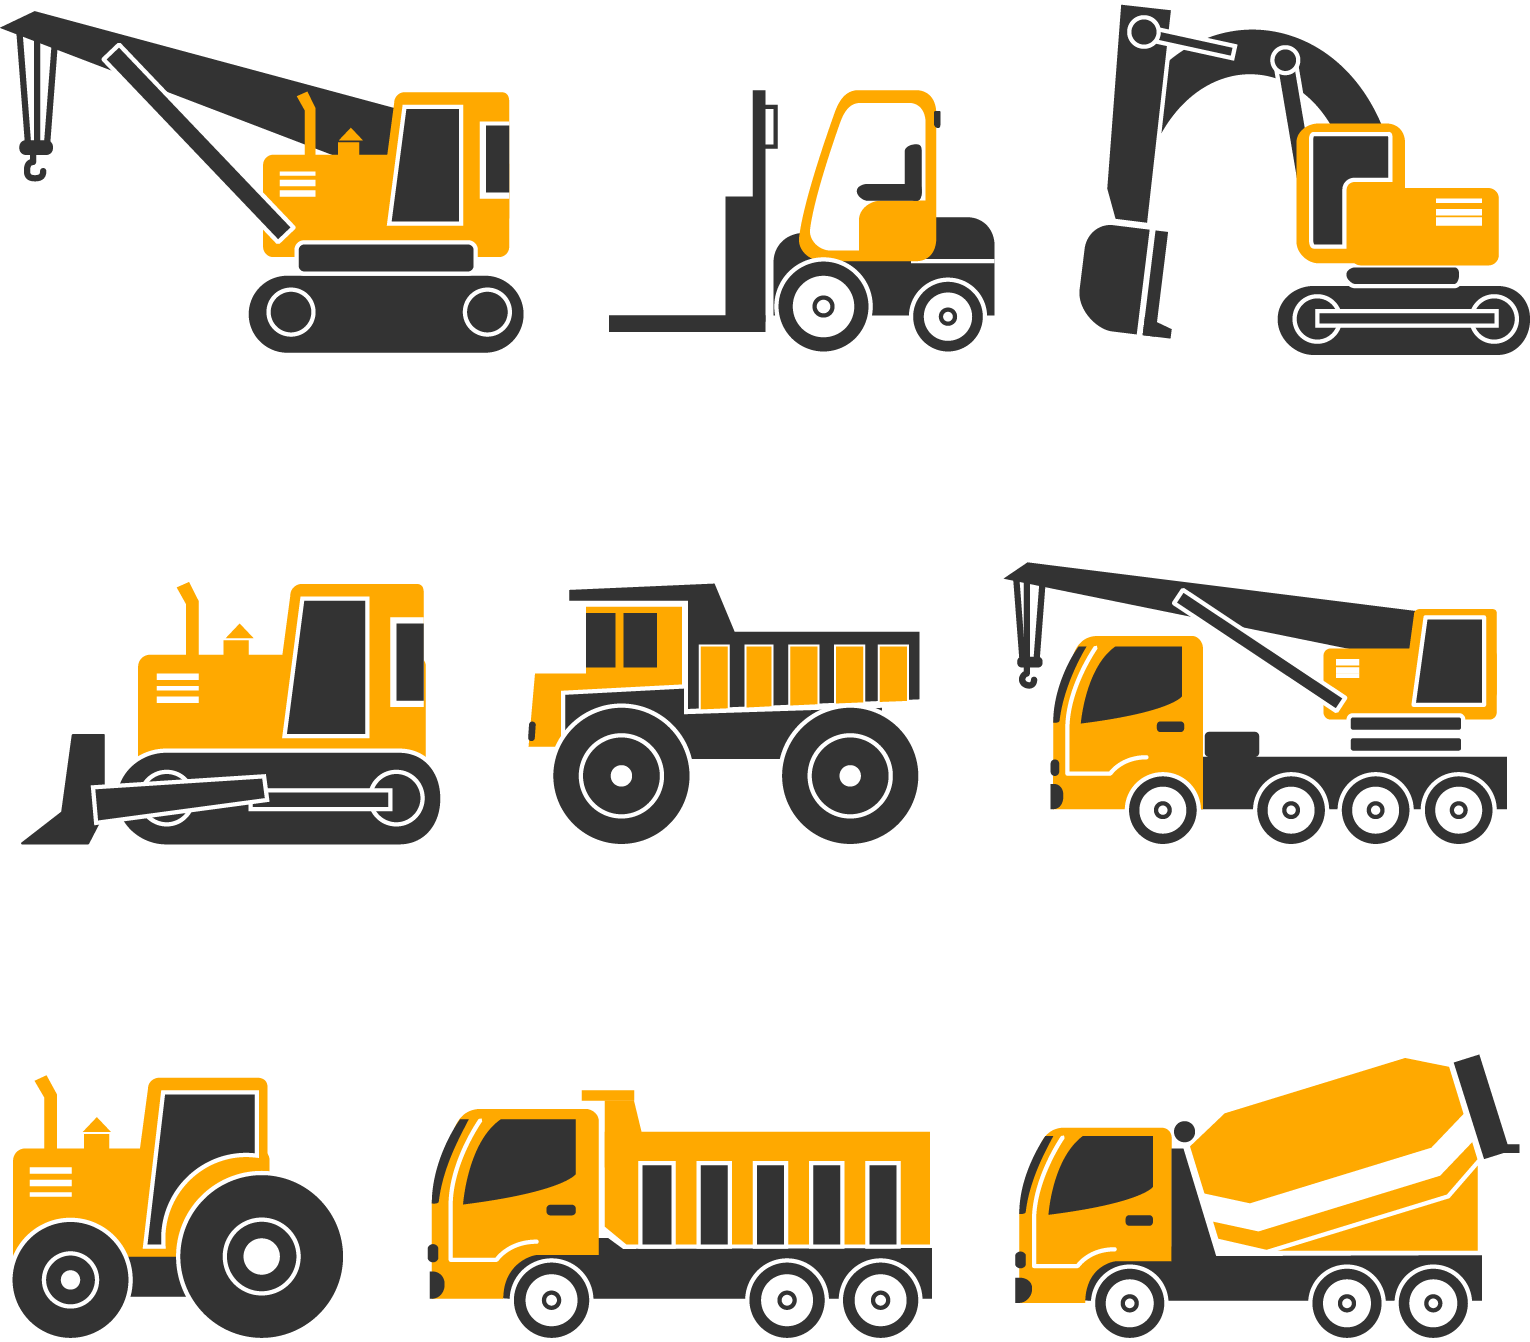 13 - Types Of Construction Vehicles (1530x1342)